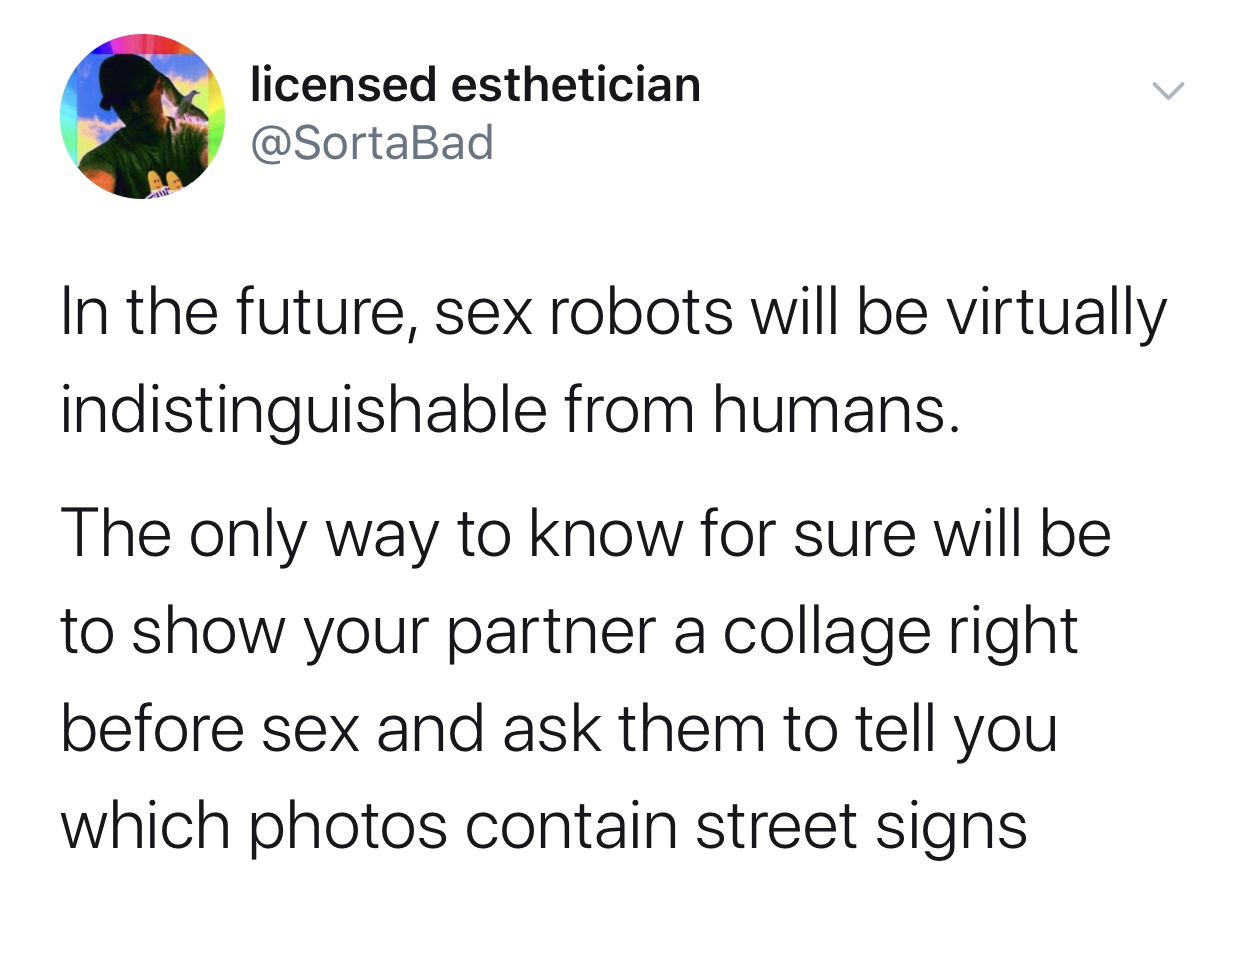 licensed esthetician In the future, sex robots will be virtually indistinguishable from humans. The only way to know for sure will be to show your partner a collage right before sex and ask them to tell you which photos contain street signs